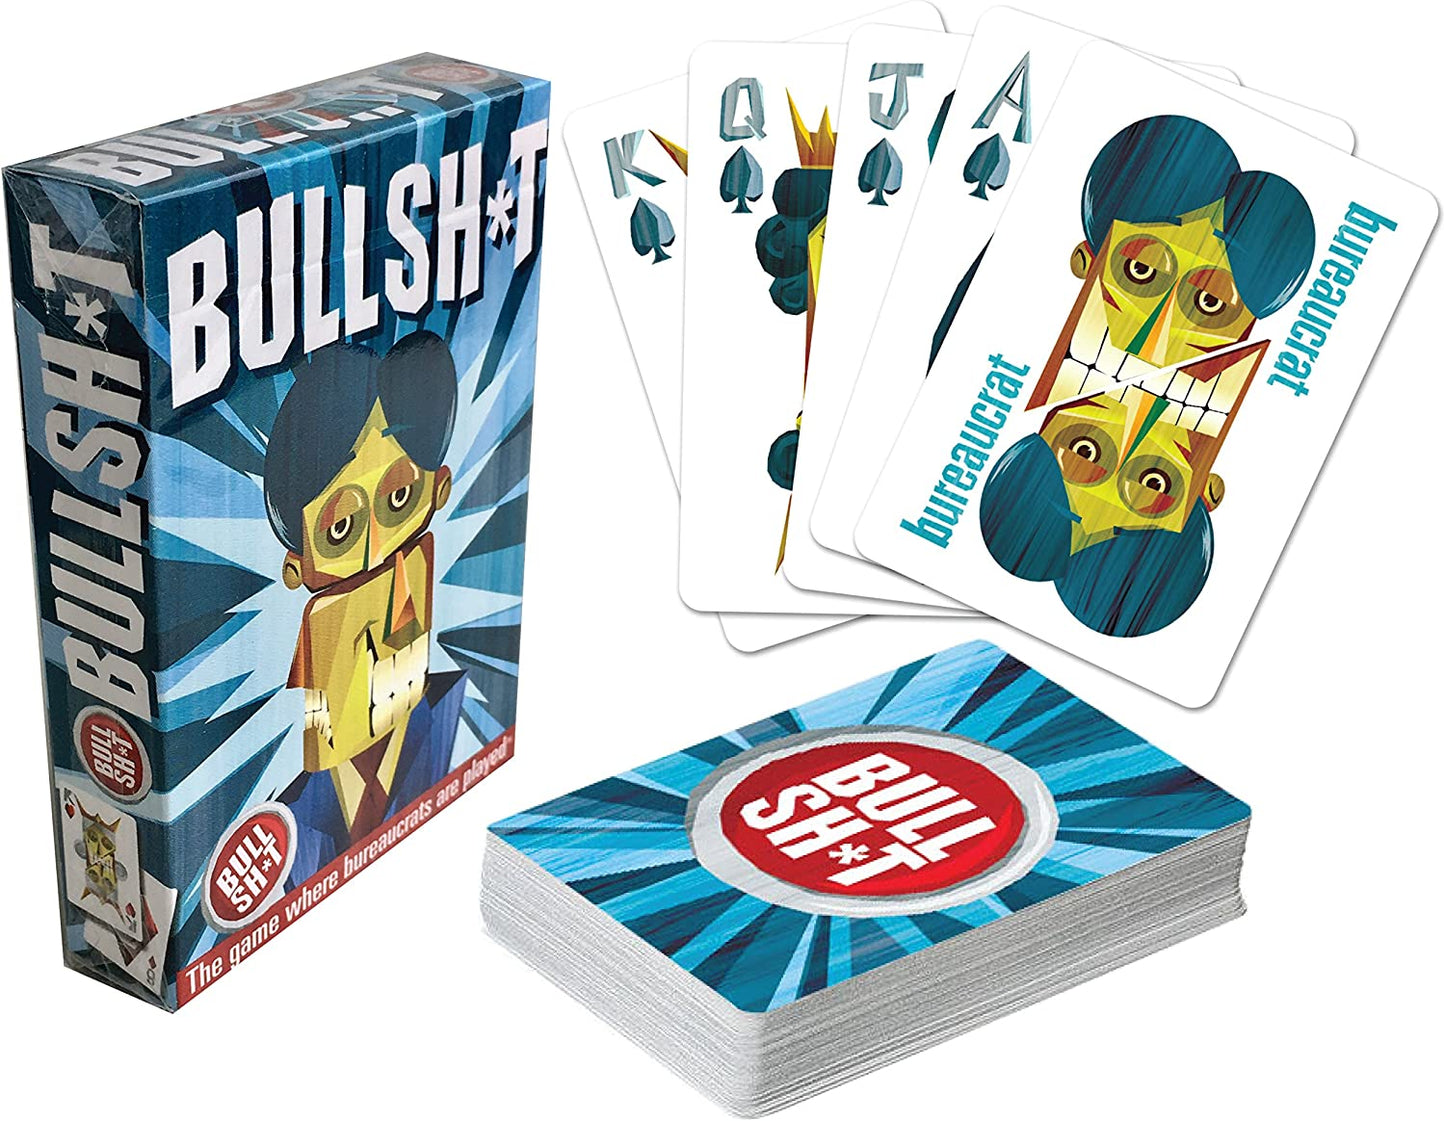 BS Button Game Expansion Pack Deck - Casino-Quality Playing Cards, Comical Jokers, and Wild Card Fun!